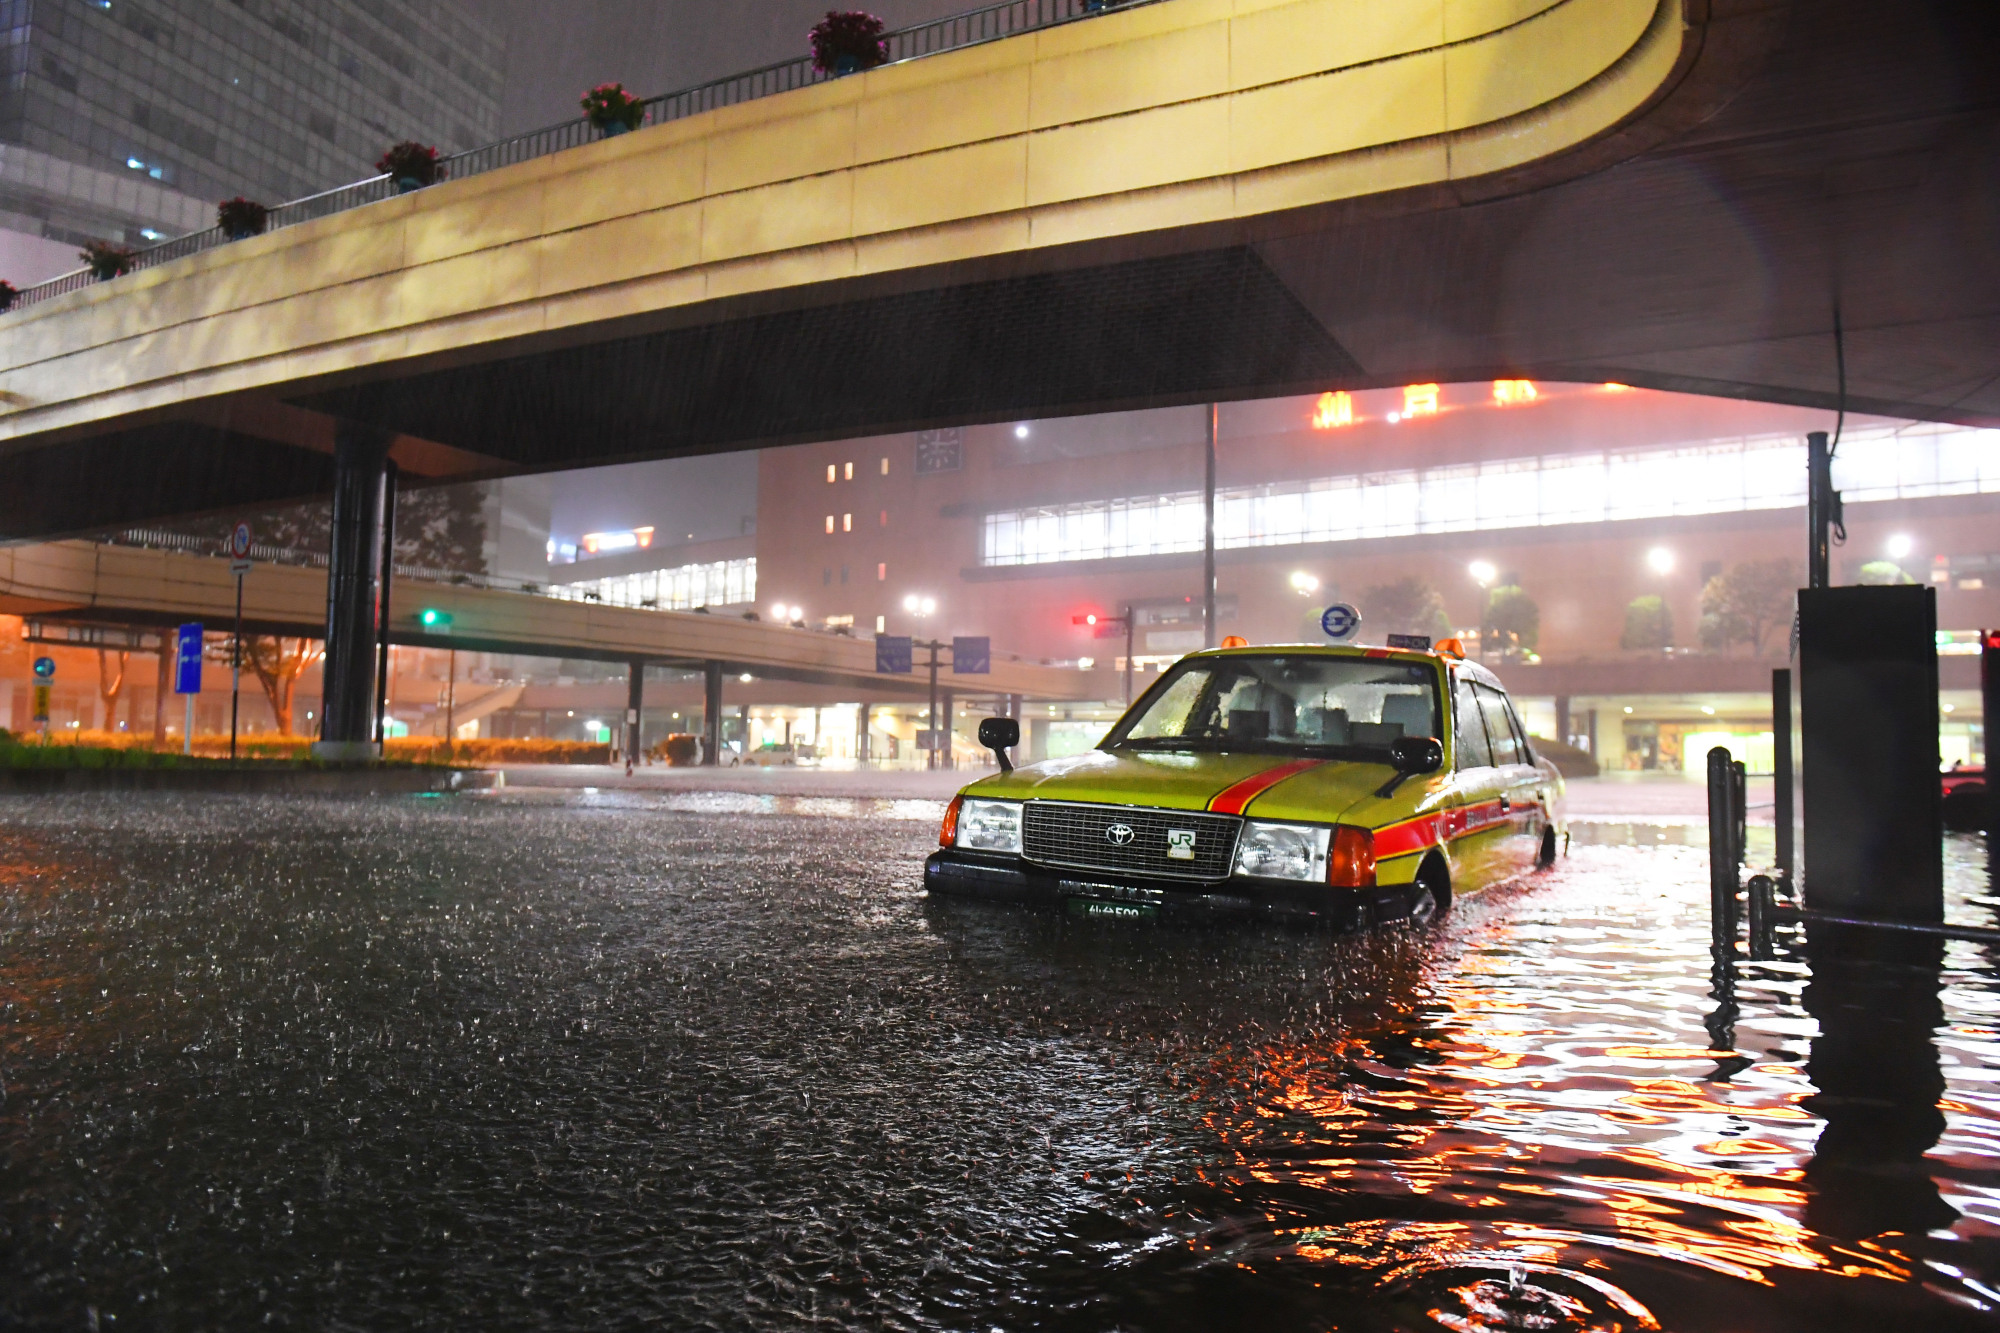 A street in Sendai is flooded on Oct. 13 after Typhoon Hagibis caused heavy rain in the area. | KAHOKU SHIMPO